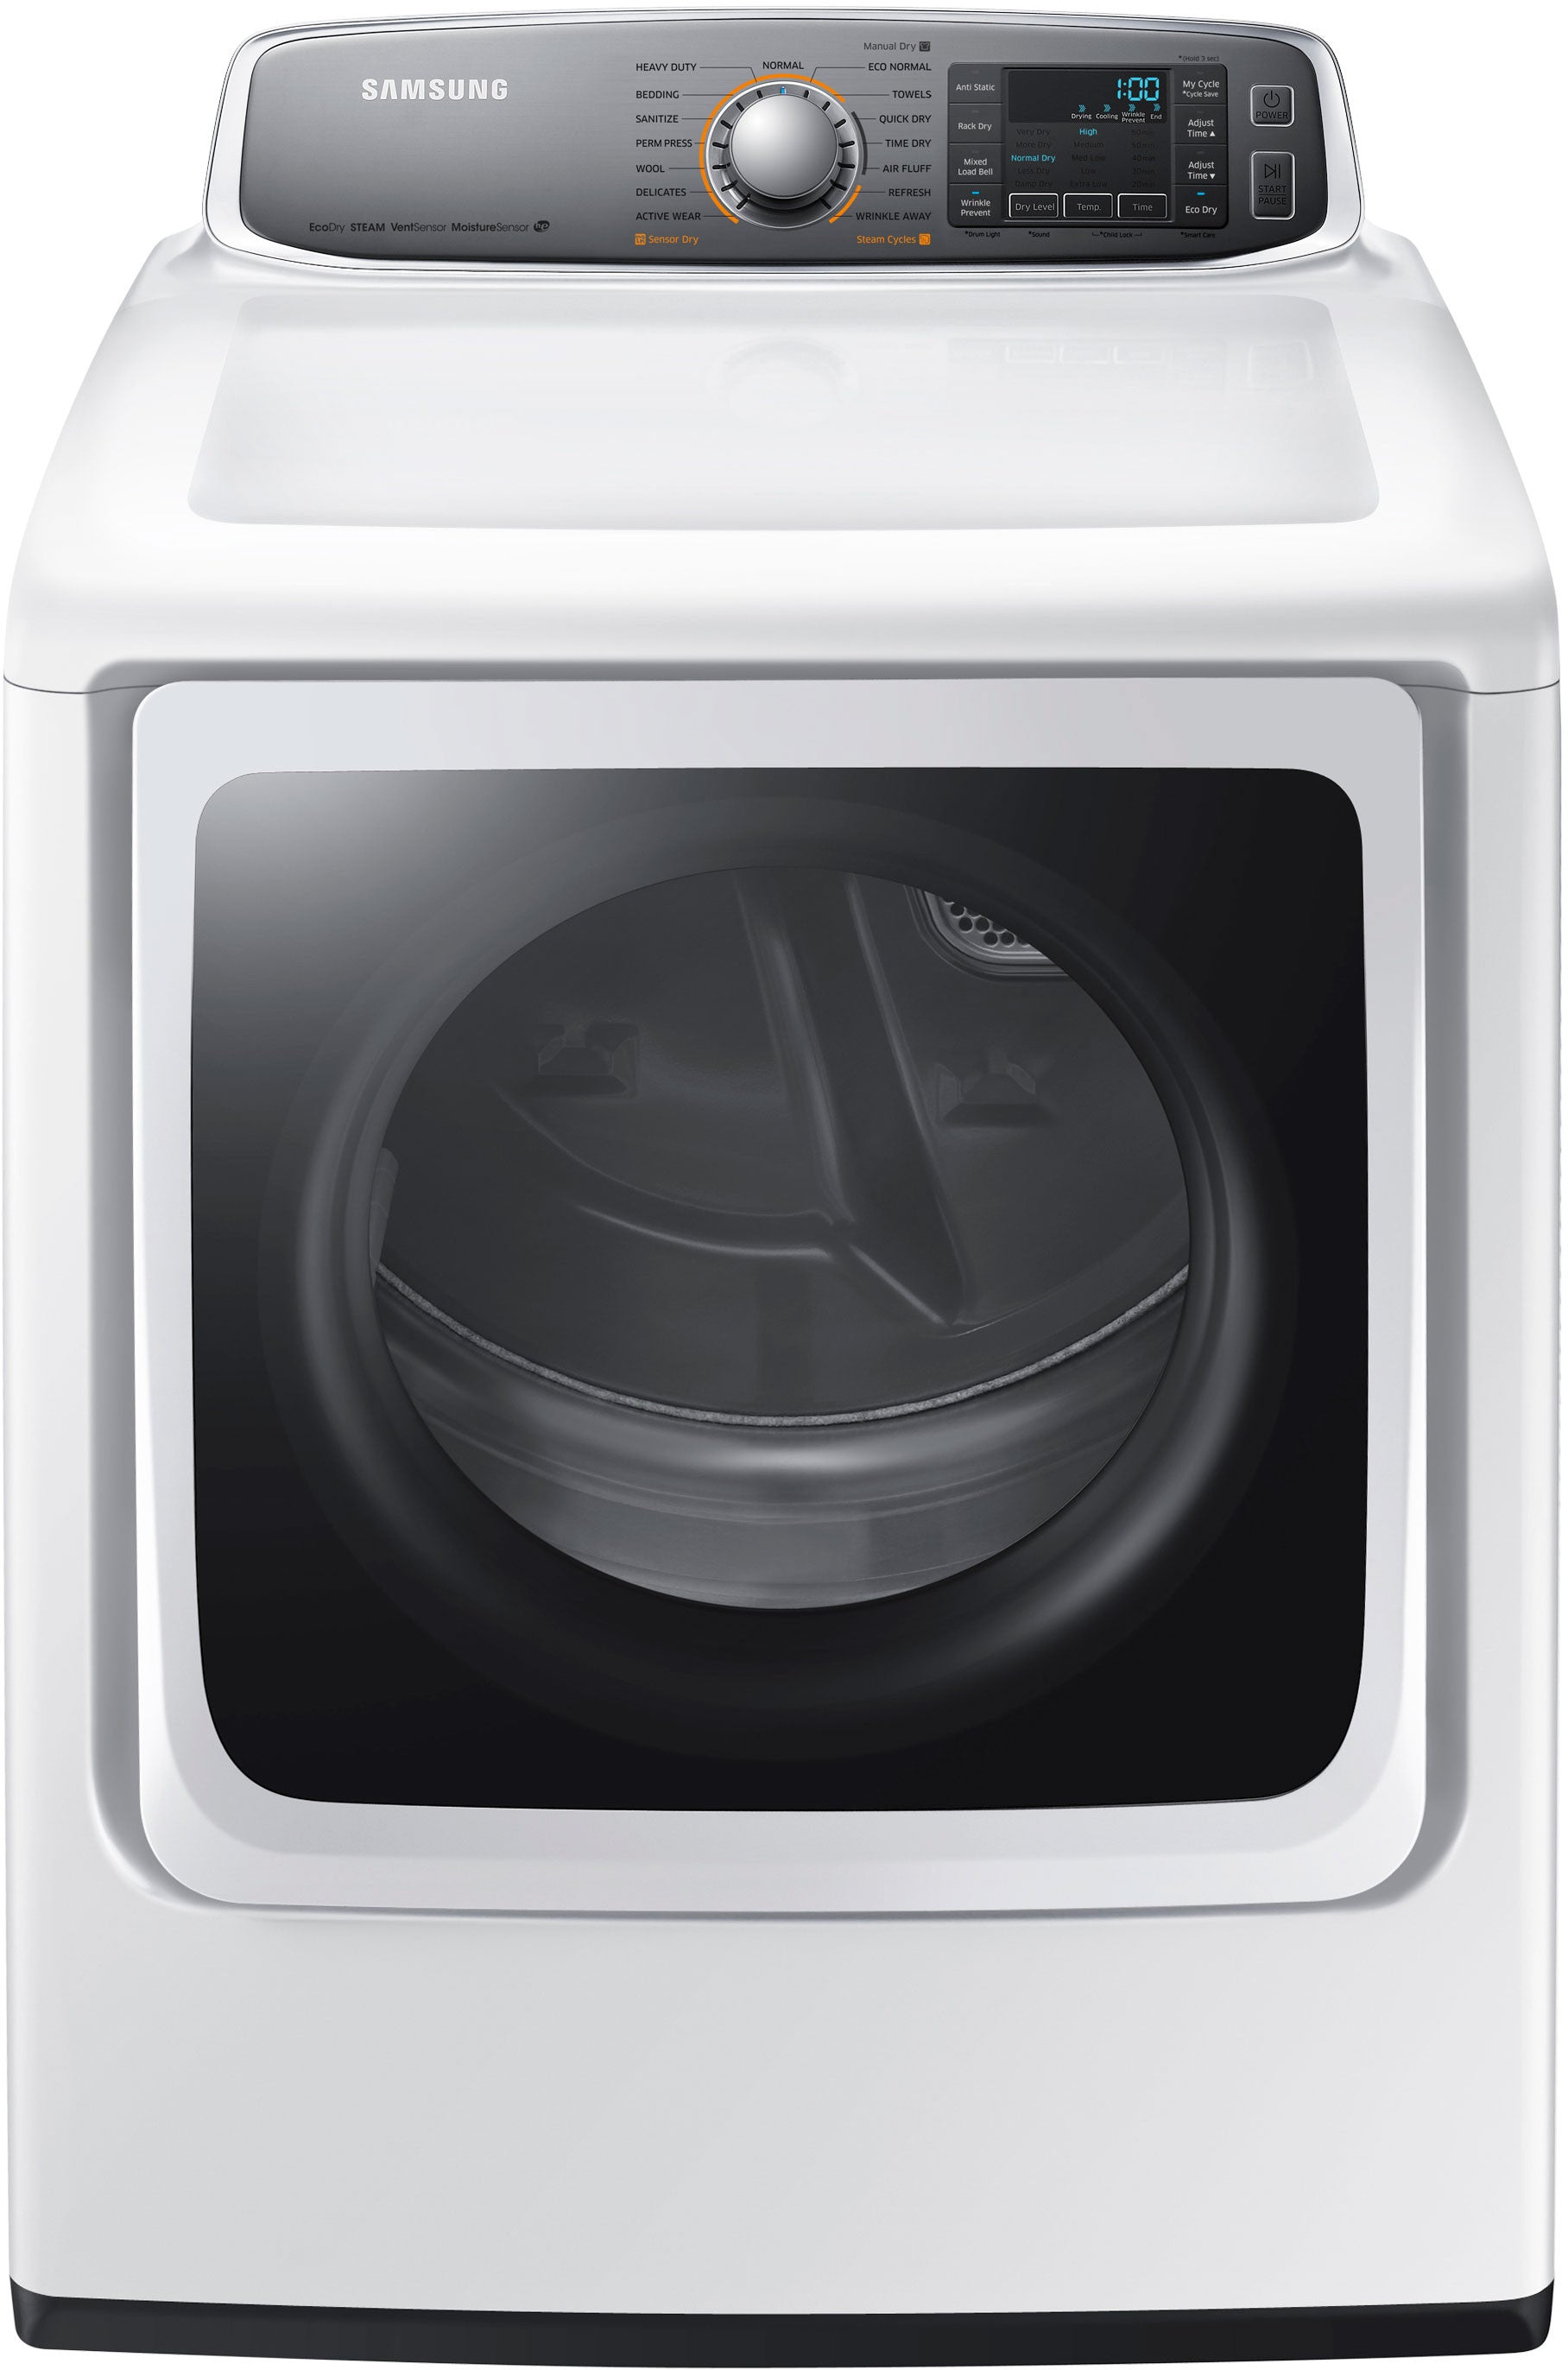 Samsung DV56H9000EW/A2 9.5 Cu. Ft. Electric Front Load Dryer (White) - Samsung Parts USA